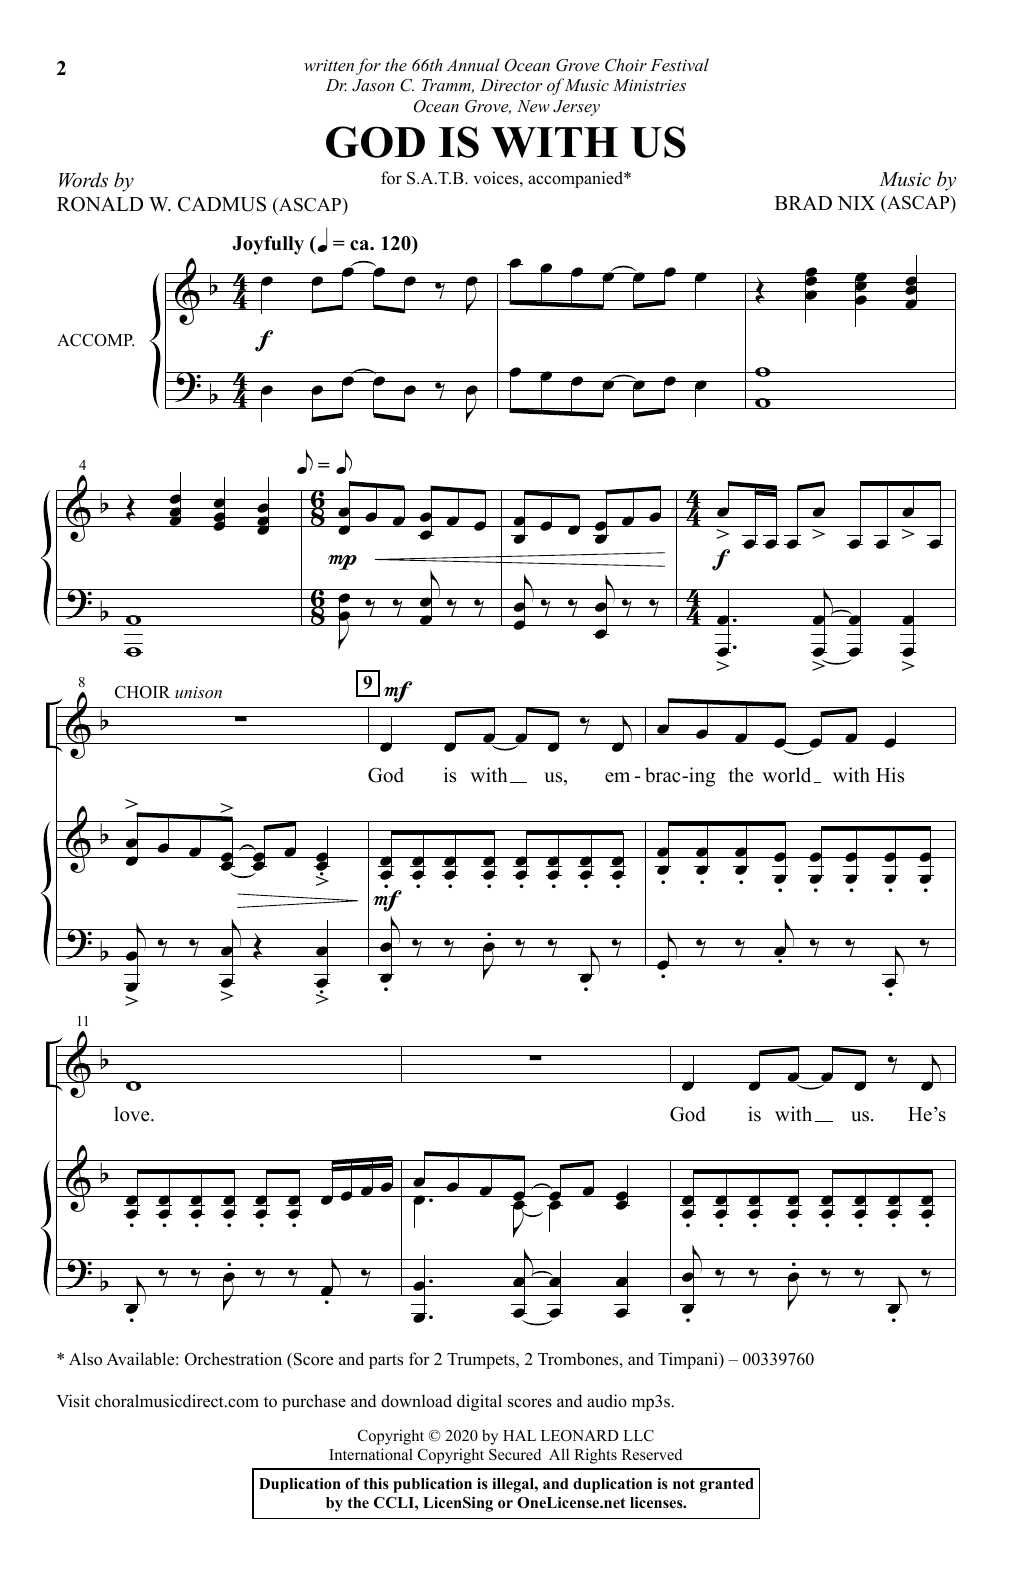 Download Ronald W. Cadmus and Brad Nix God Is With Us Sheet Music